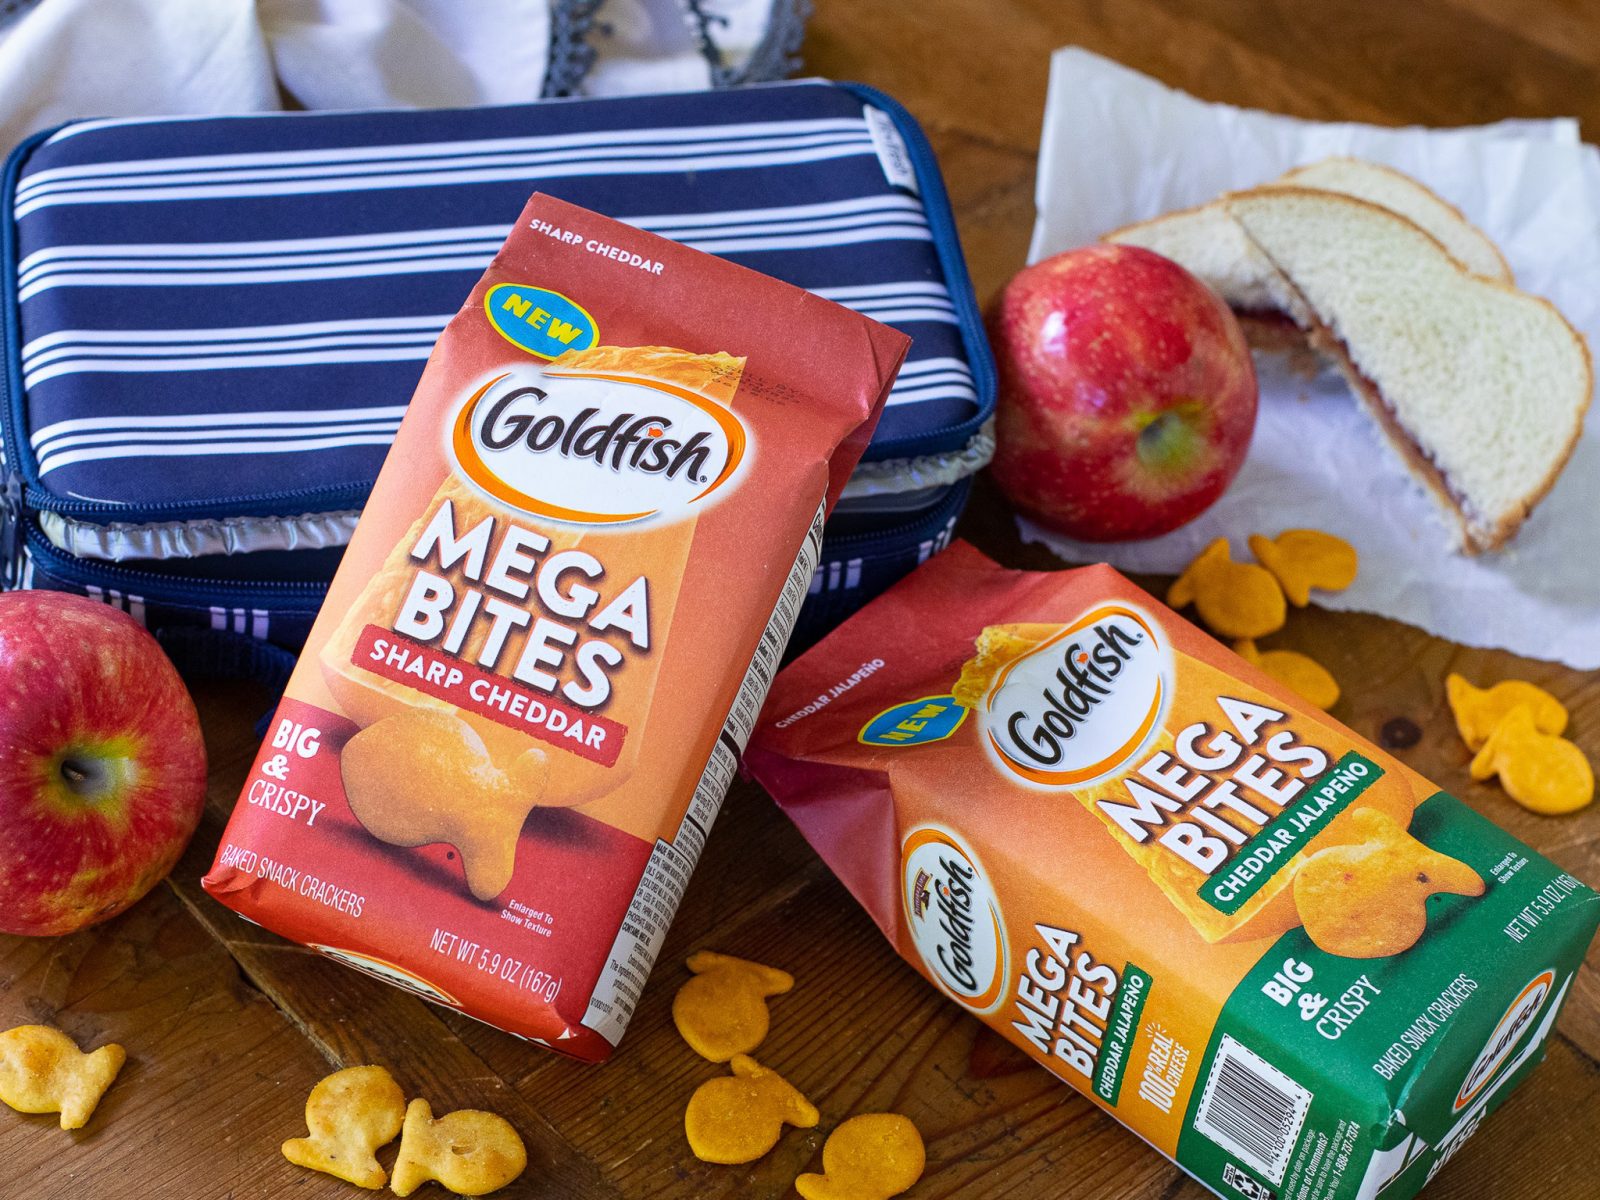 Load Your Coupon For FREE Goldfish Mega Bites – Clip Today ONLY!